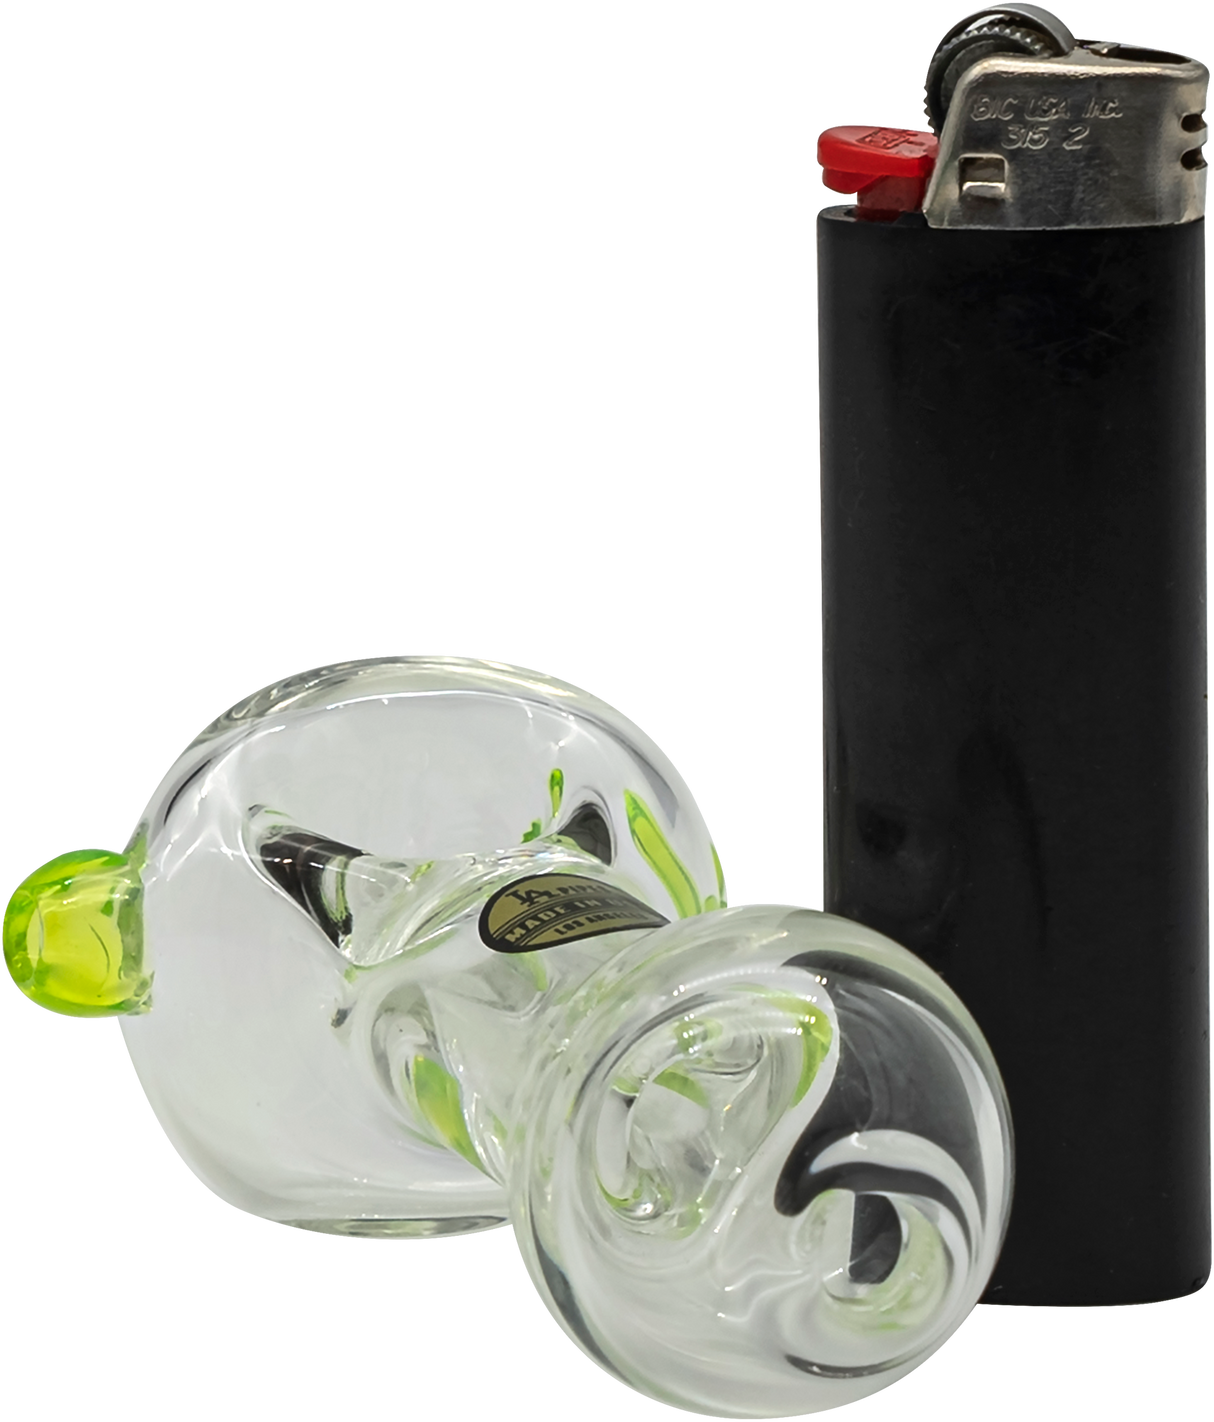 LA Pipes Thick Glass Spoon Pipe in Assorted Colors with Deep Bowl - Side View